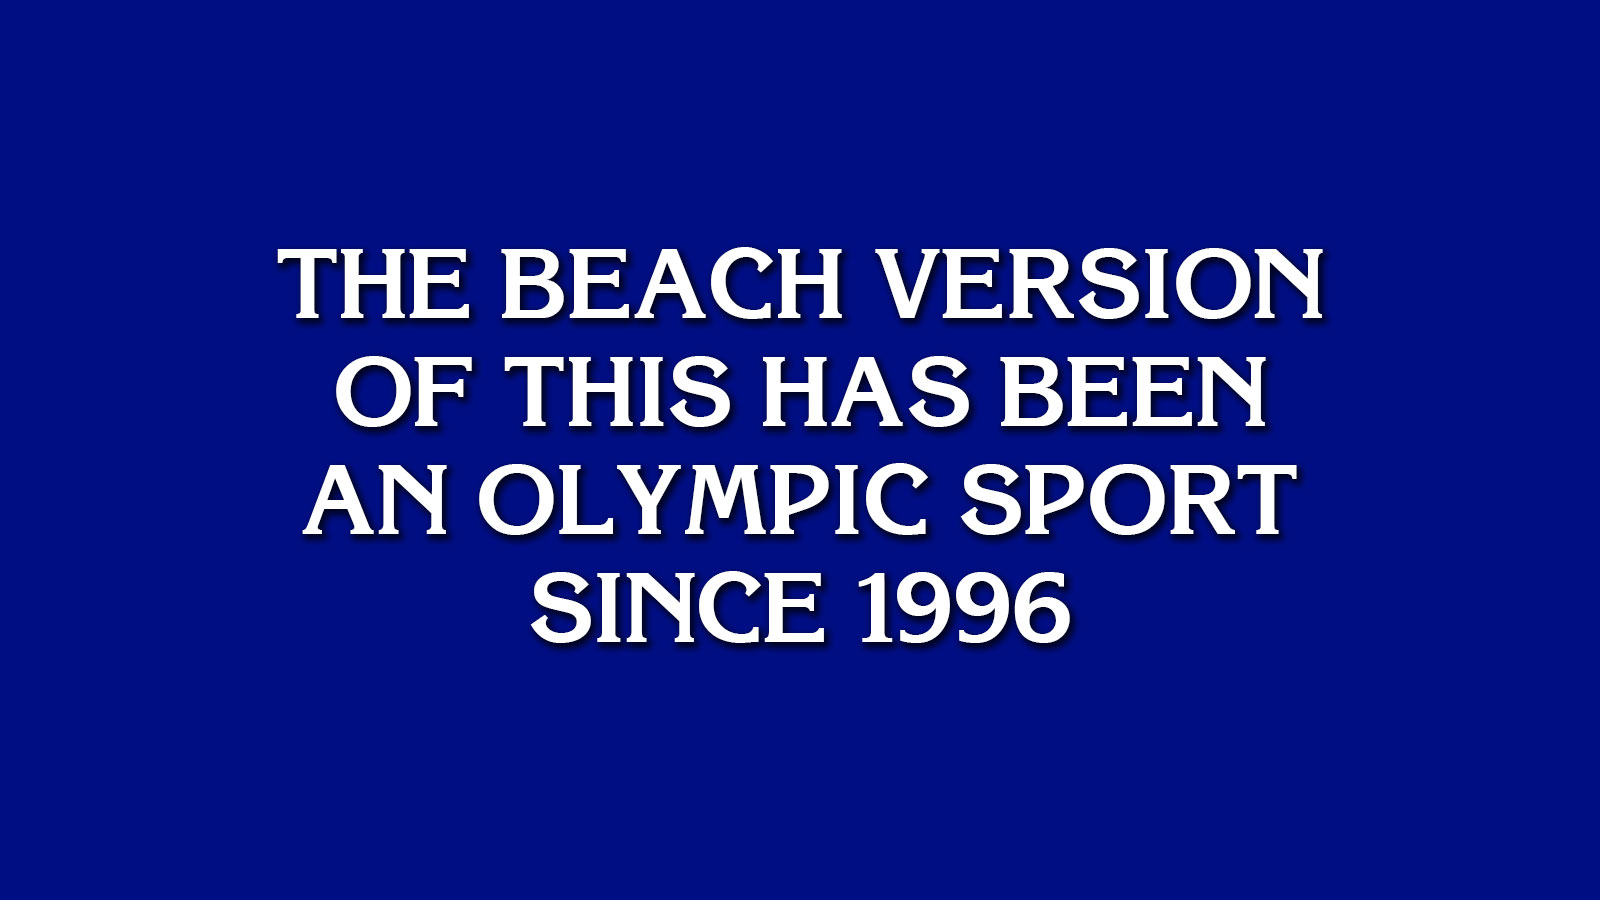 Can You Beat an Easy Game of “Jeopardy!”? 150